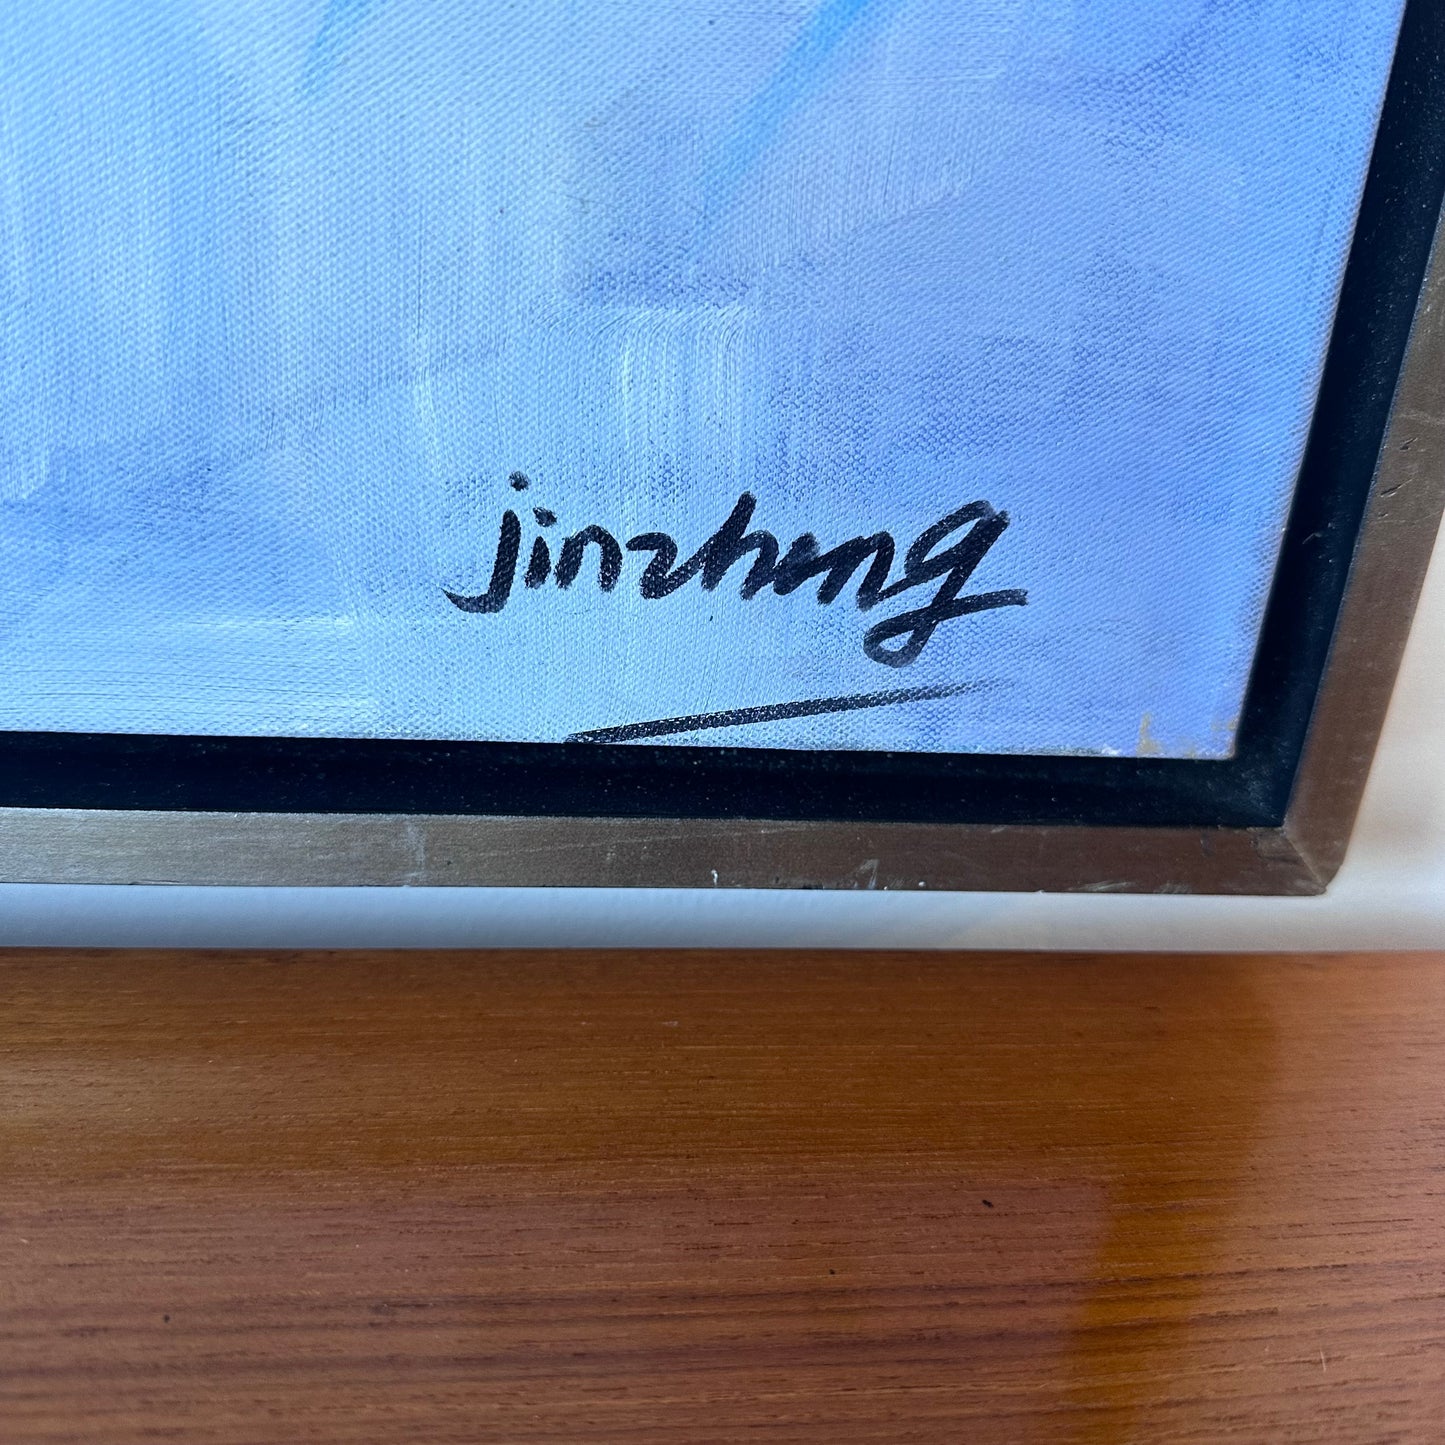 SIGNED AND FRAMED ABSTRACT ARTWORK BY ARTIST JINZHONG